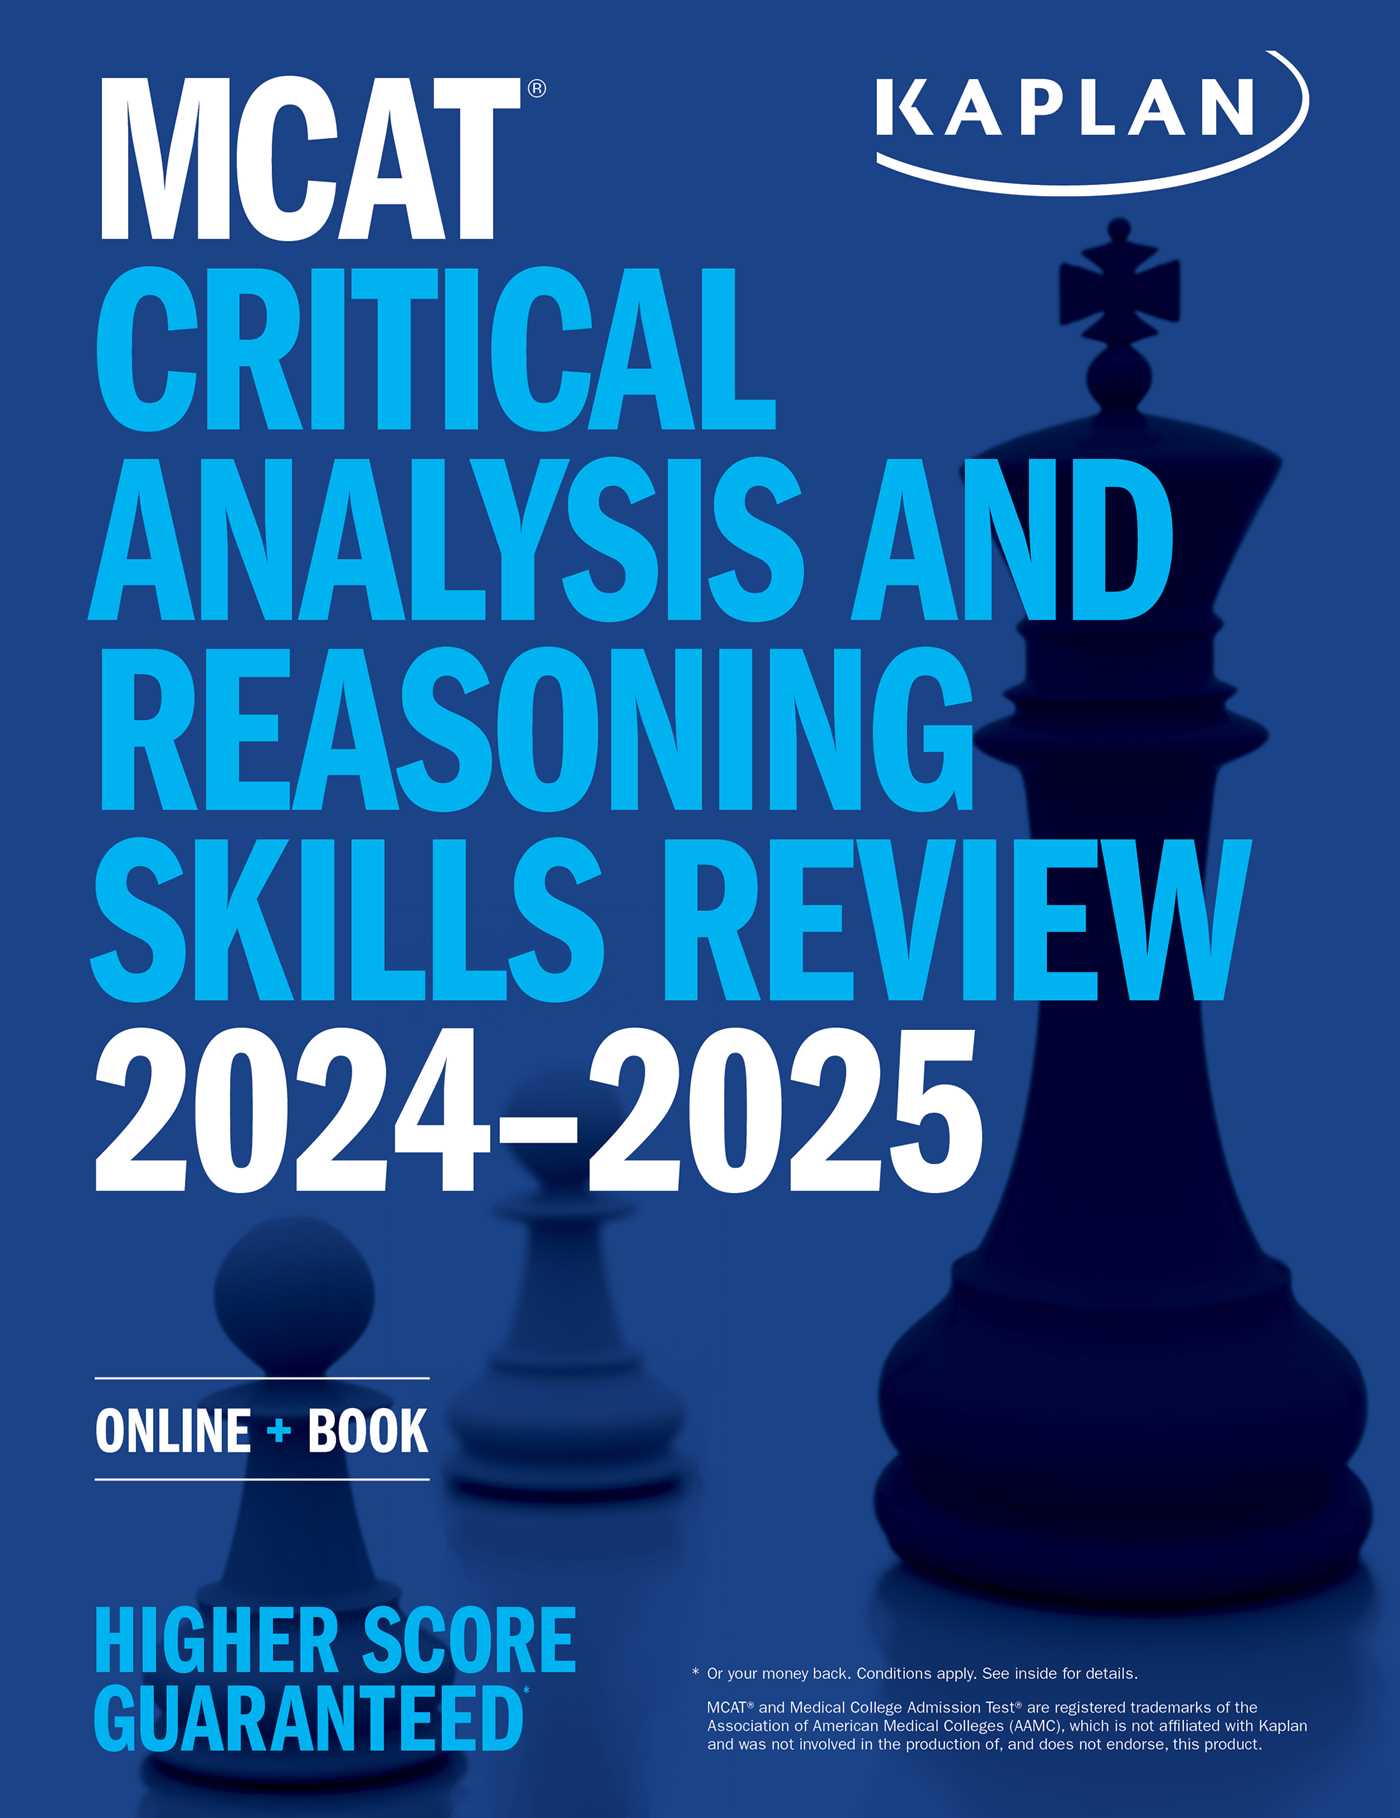 MCAT CRITICAL ANALYSIS AND REASONING SKILLS REVIEW 2024-2025, by KAPLAN TEST PREP